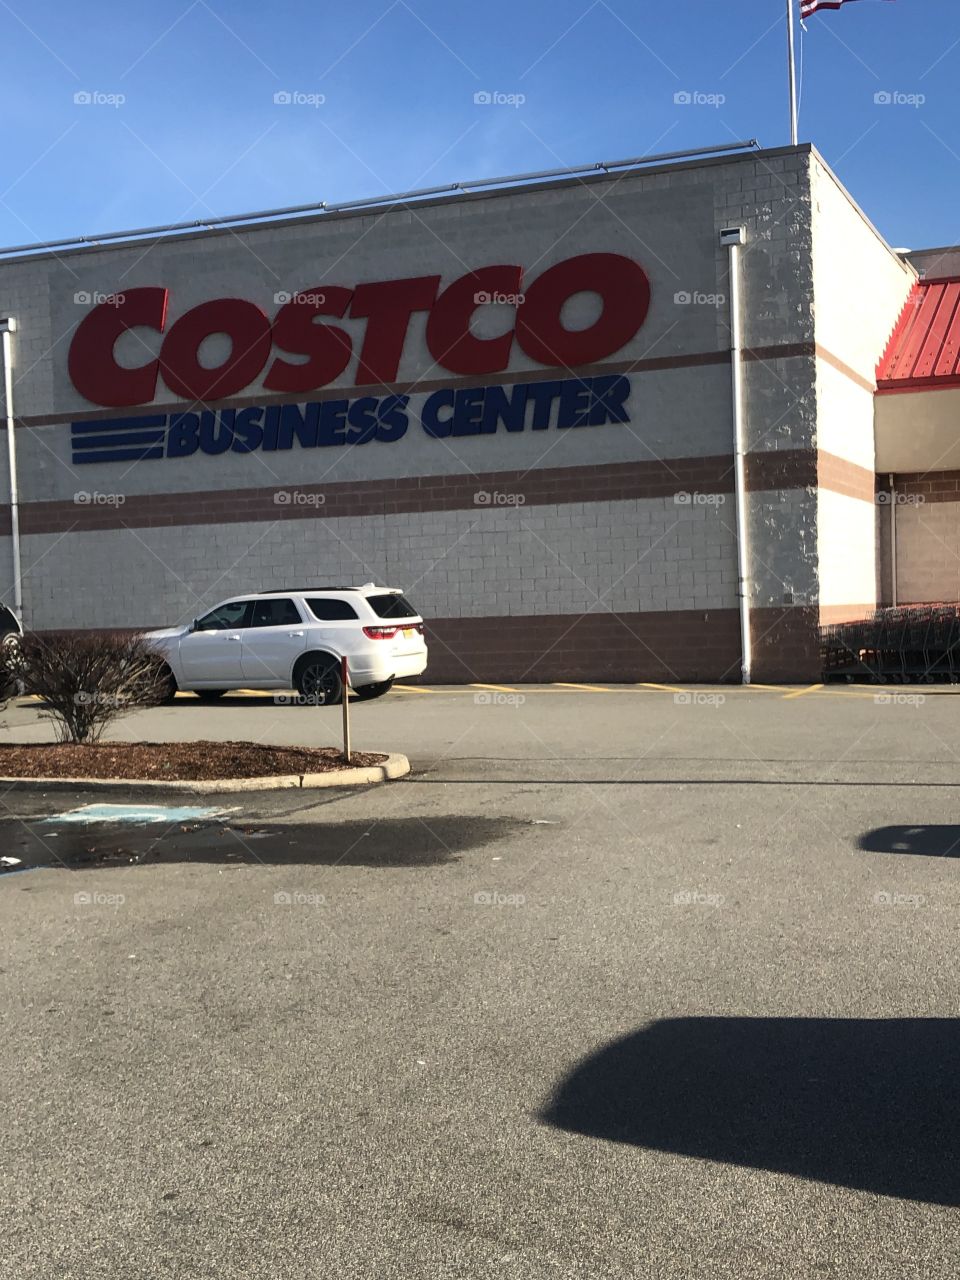 Such a nice place to be. Where businesses can do their shopping. If you thought that regular Costco was big, imagine the business center. 